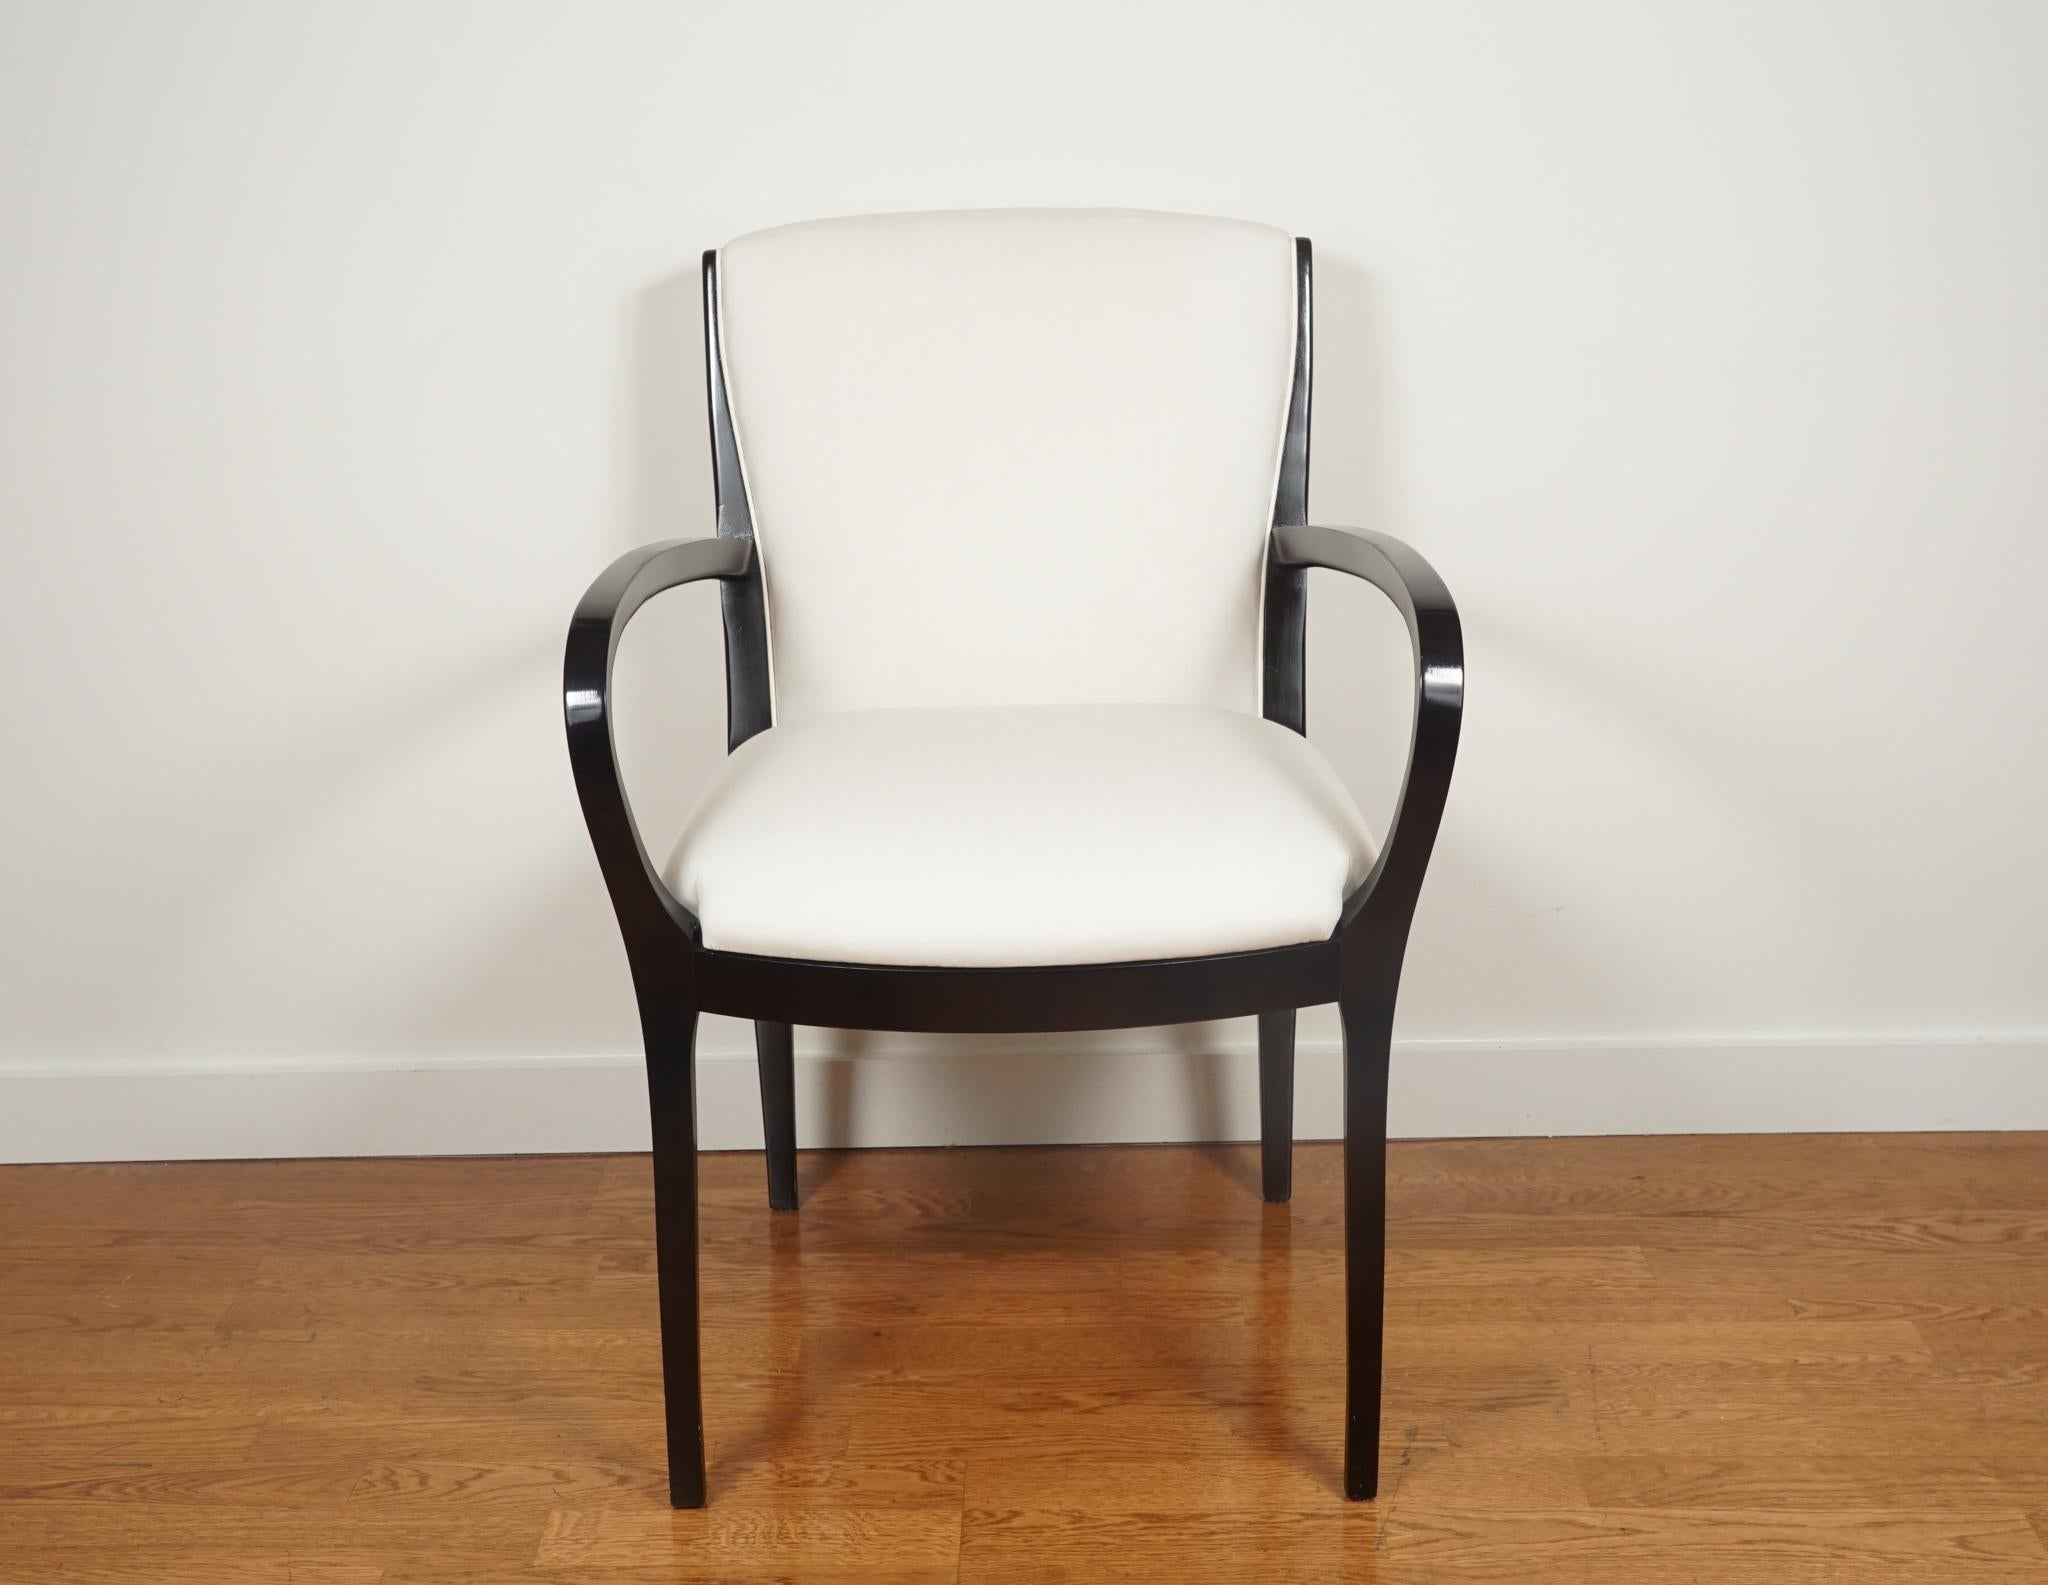 Beautiful, sleek, maple dining chairs. Completely refurbished with a modern ebonized finish.
Reupholstered in a soft ivory muslin.